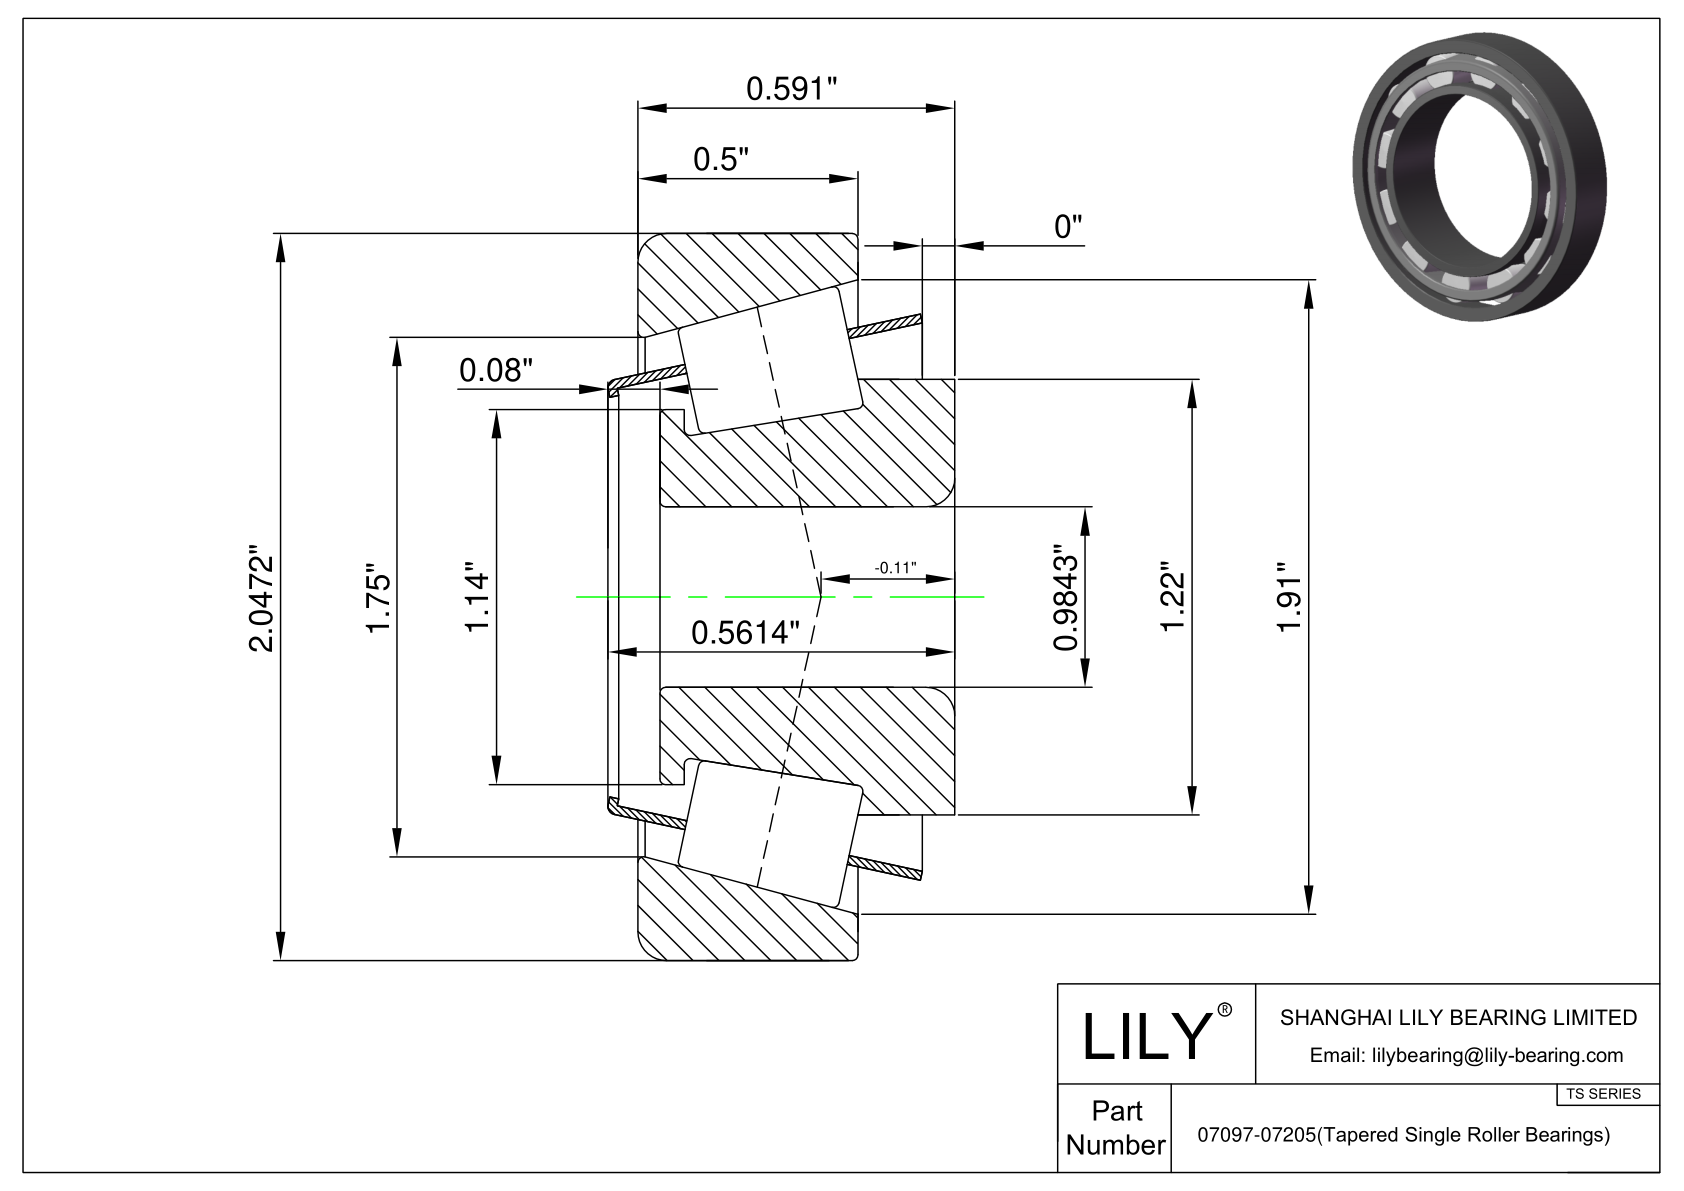 07097-07205 TS (Tapered Single Roller Bearings) (Imperial) cad drawing